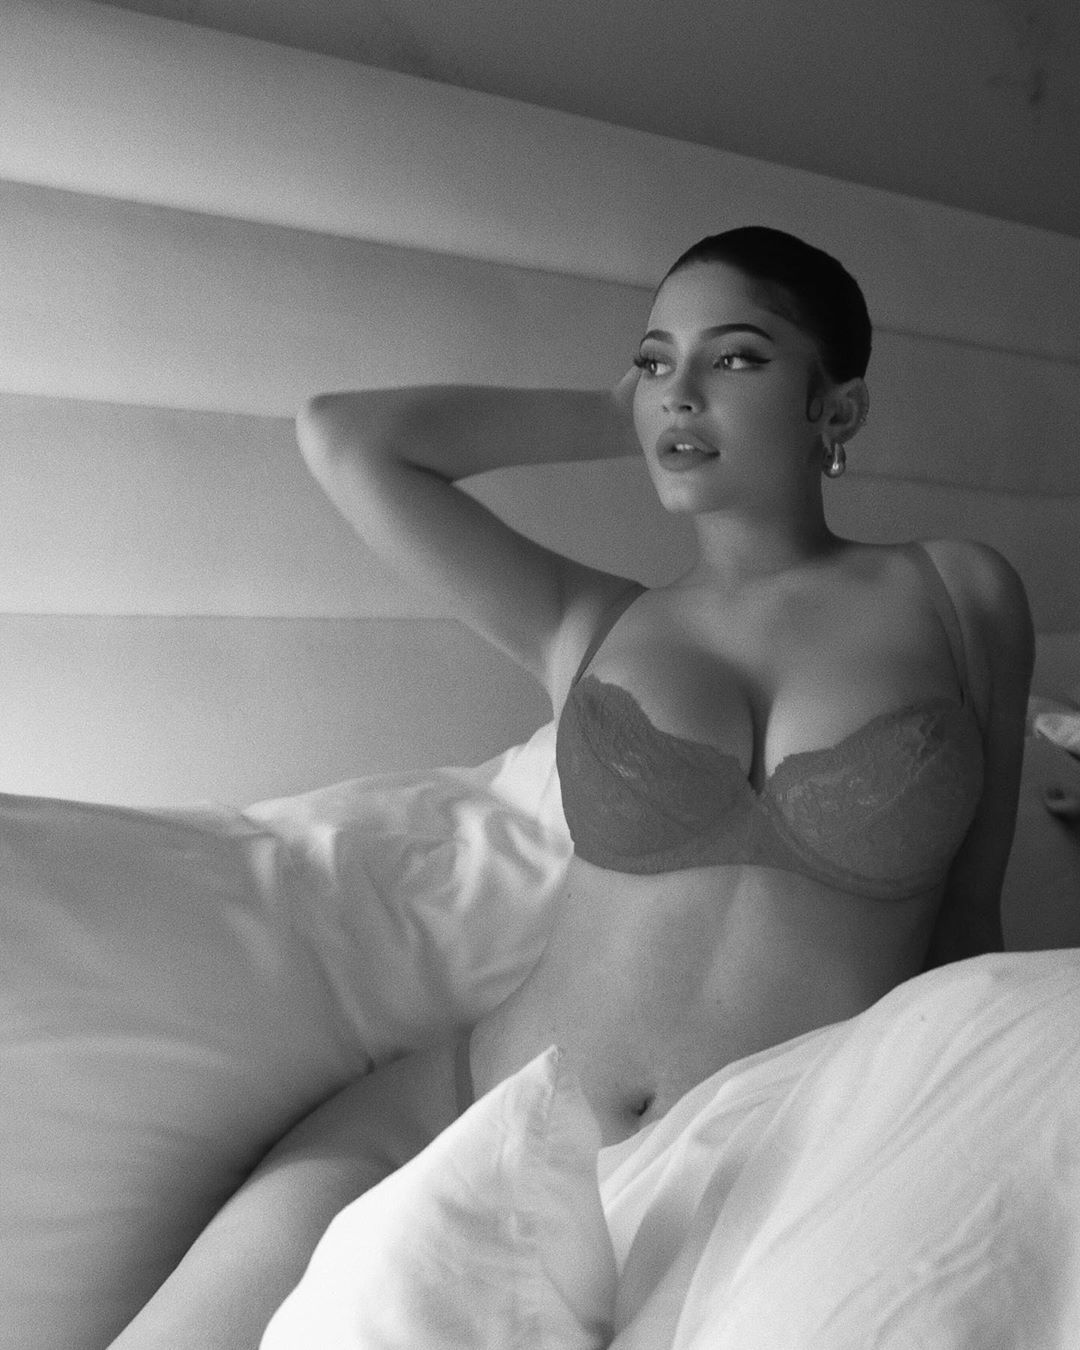 Kylie Jenner Posts Thirst Trap Photo Wearing Sexy Lingerie In Bed